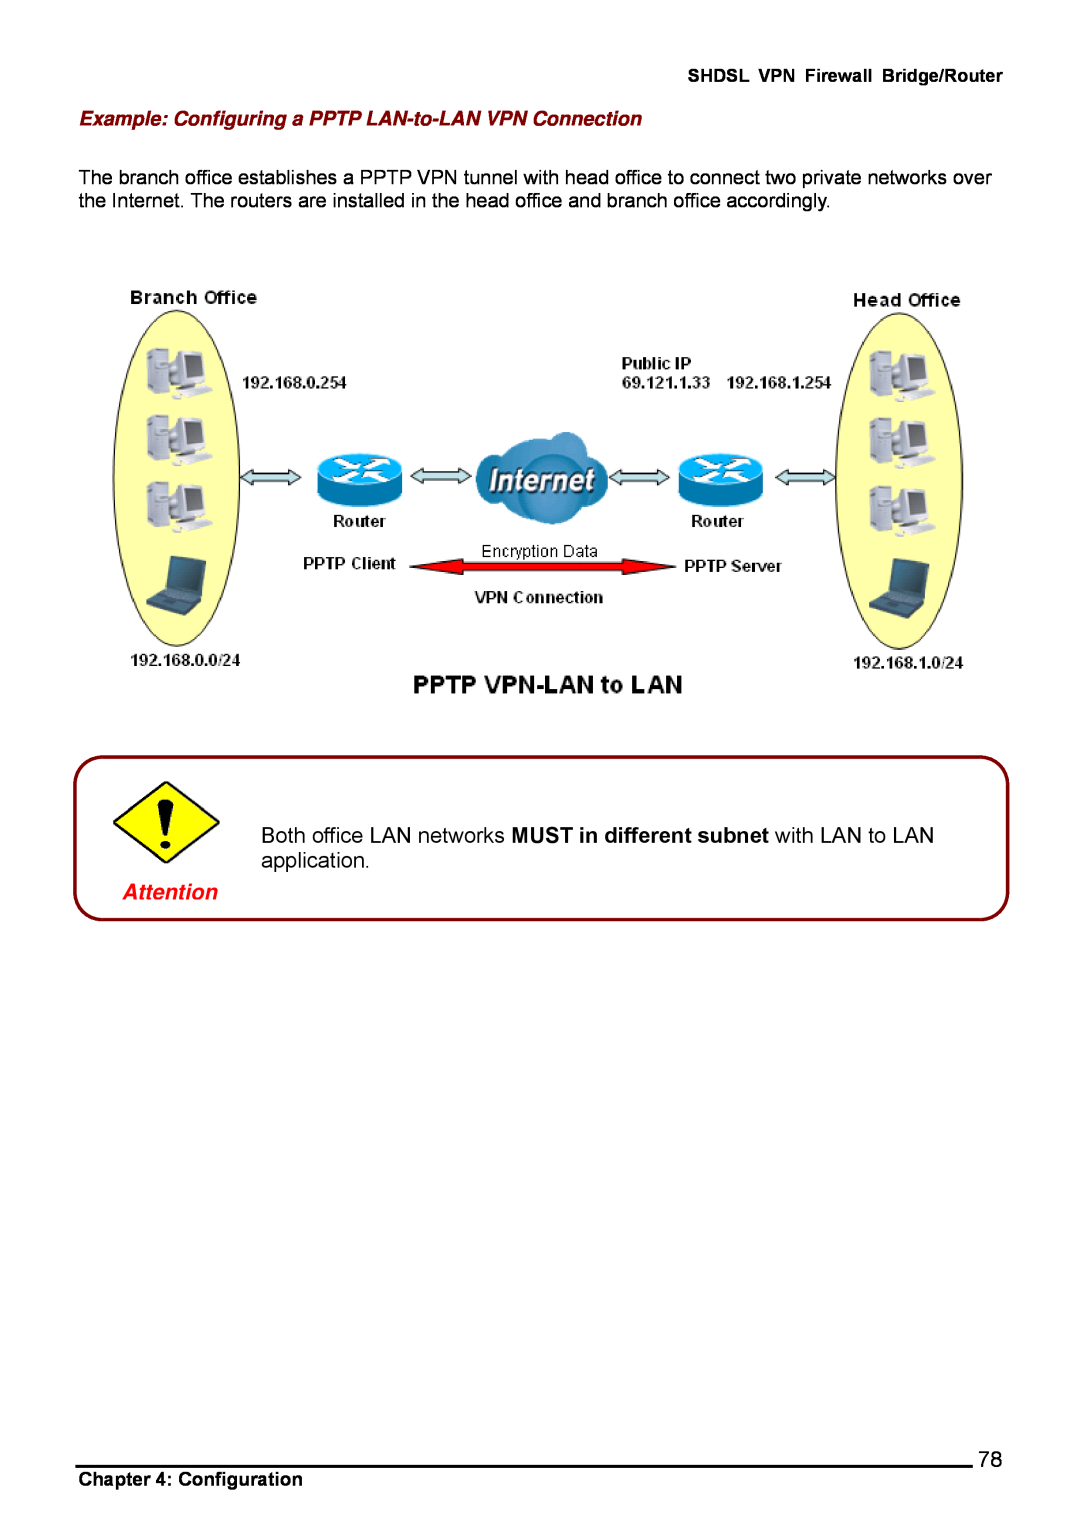 Billion Electric Company 8501 user manual Example Configuring a PPTP LAN-to-LAN VPN Connection, Configuration 